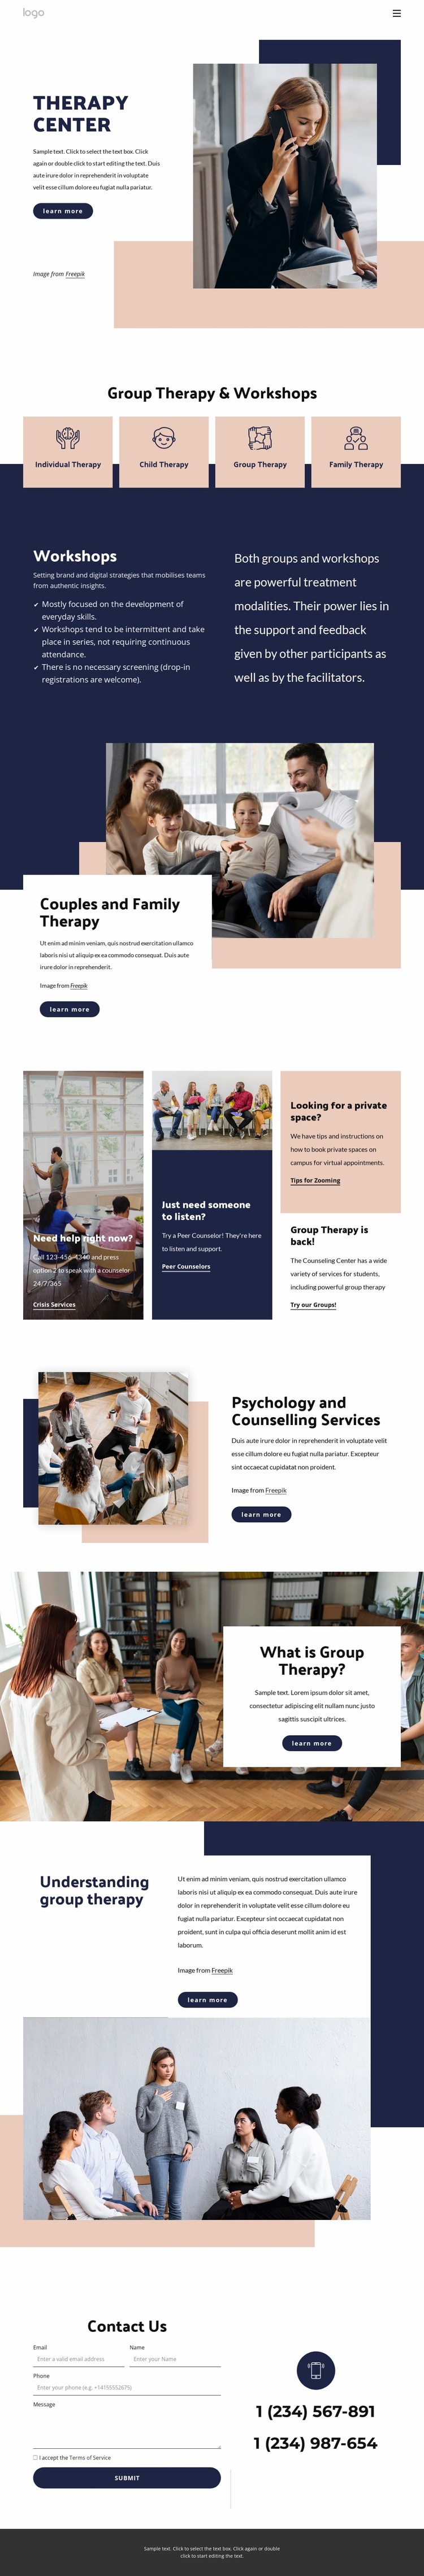 Therapy center Website Builder Templates